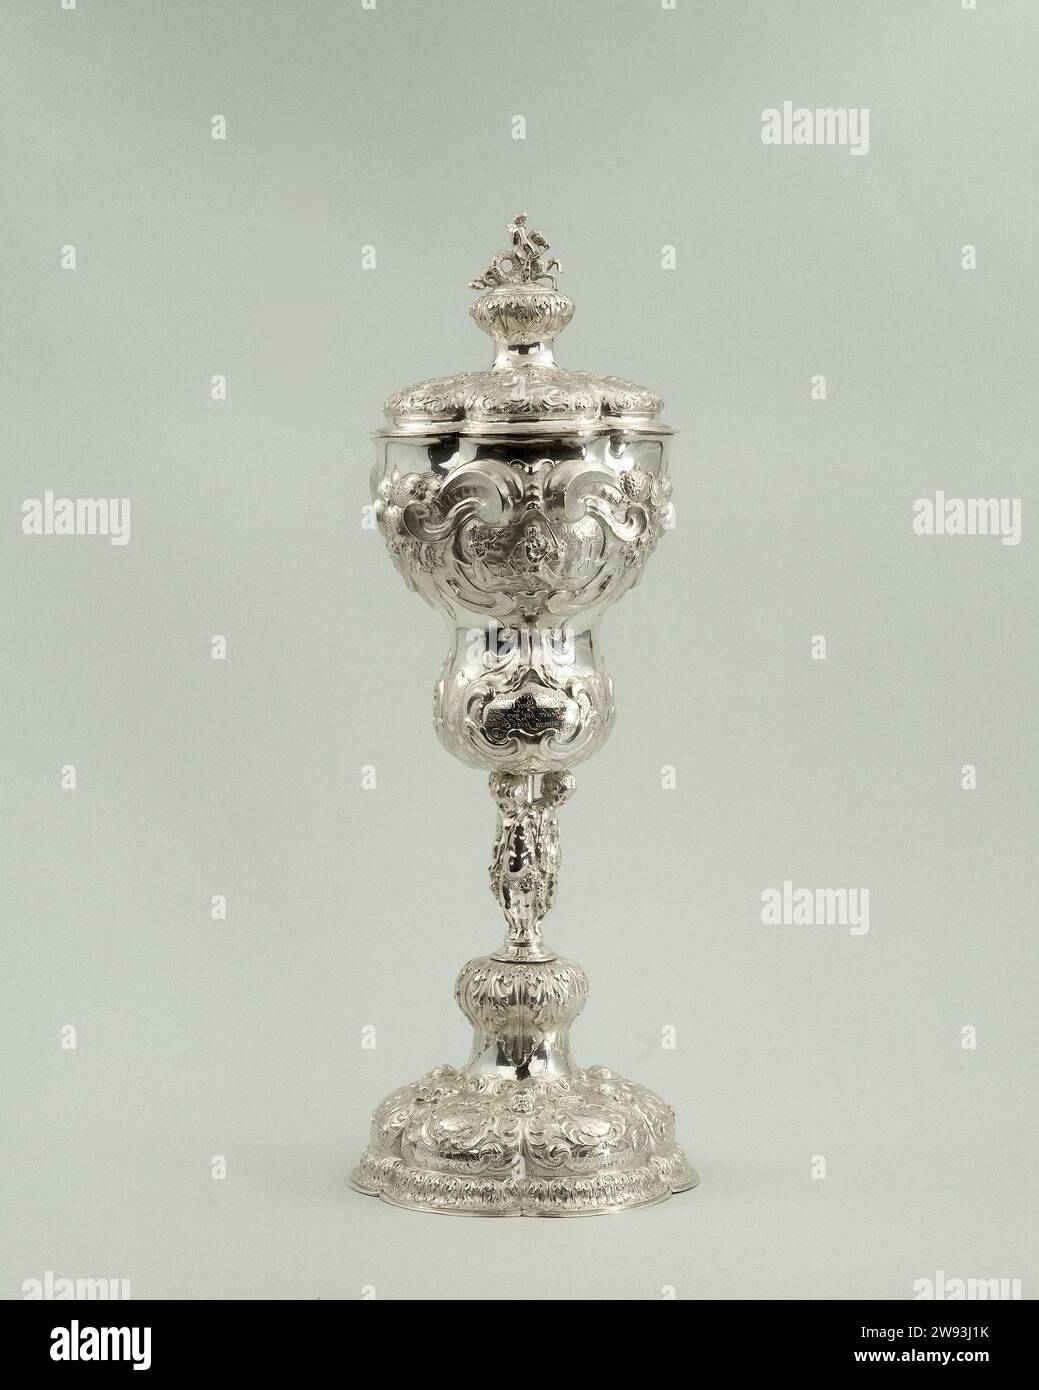 Cup of Zwartsluis, Johan Kuynder, 1676 goblet Bokaal, silver with lid, decorated with floating, on the cuppa the allegories of war, peace and justice with appropriate poems. The cuppa rests on three children's figures with grape bunches. On the foot six weapons with the captions: Gerryt Kloecken; Pieter Jansen, Swarte Suis; Roelof Stroombergh, Jan van Steenwijck, Fransisalana. On the lid the Wapen van Oranje and the portraits of the Prinsen Willem I, Maurits, Fred. Hendrik, Willem II and Willem III. As a crowning Neptunus driving on a hippocampus. On the inside a portrait with the caption Hend Stock Photo